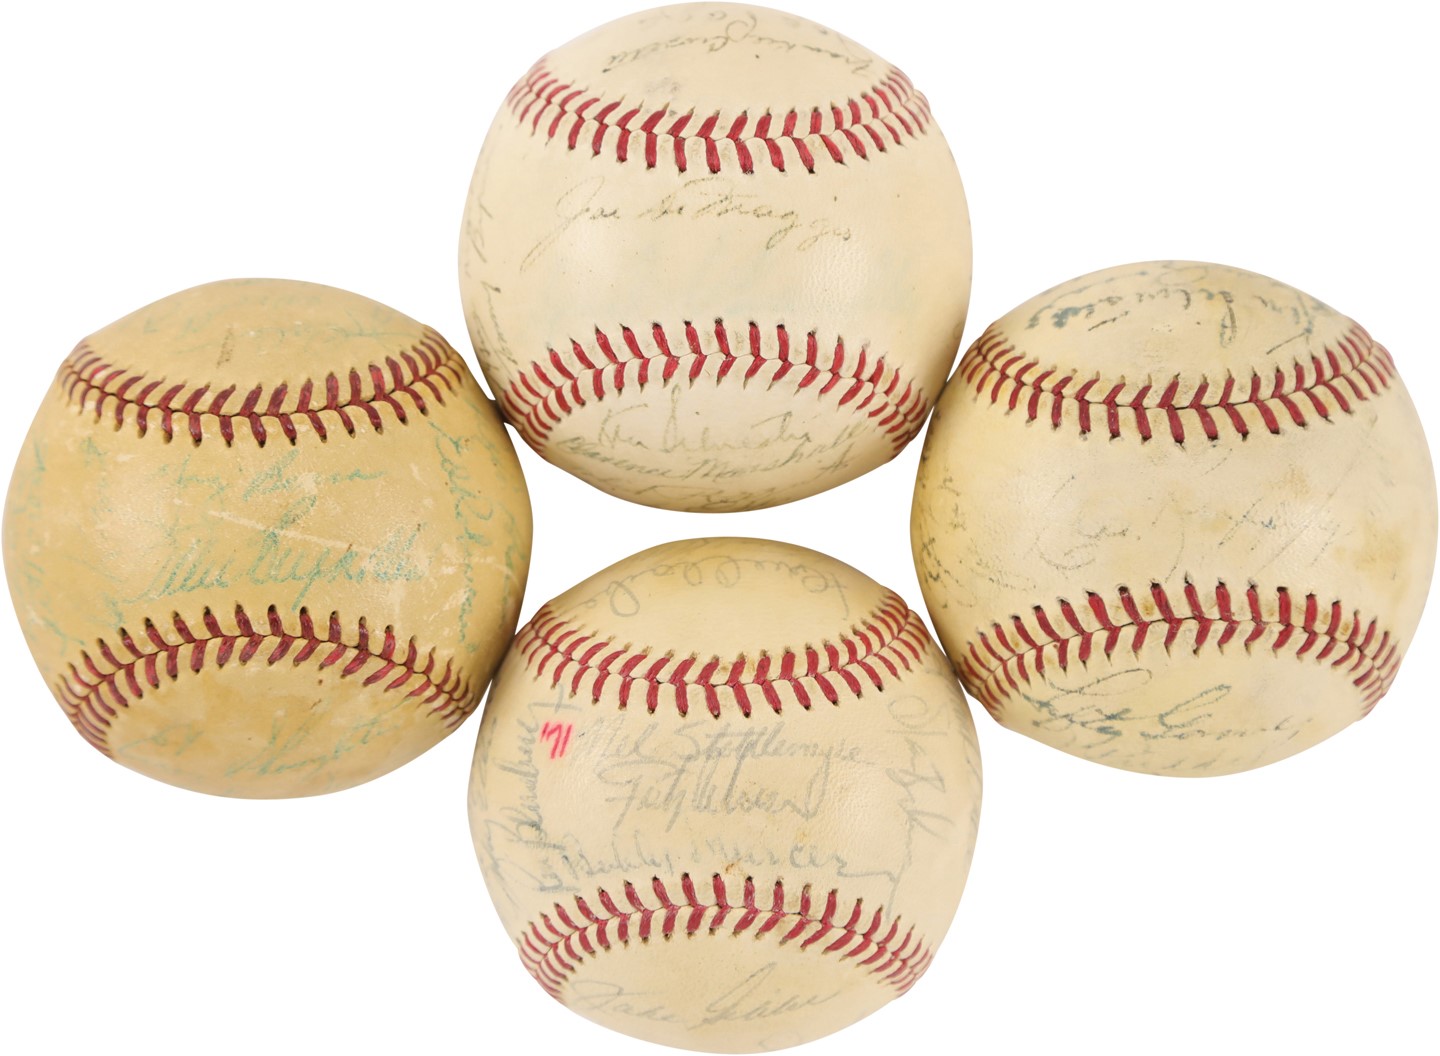 - 1940s-70s New York Yankees Team Signed Baseball Collection (10)